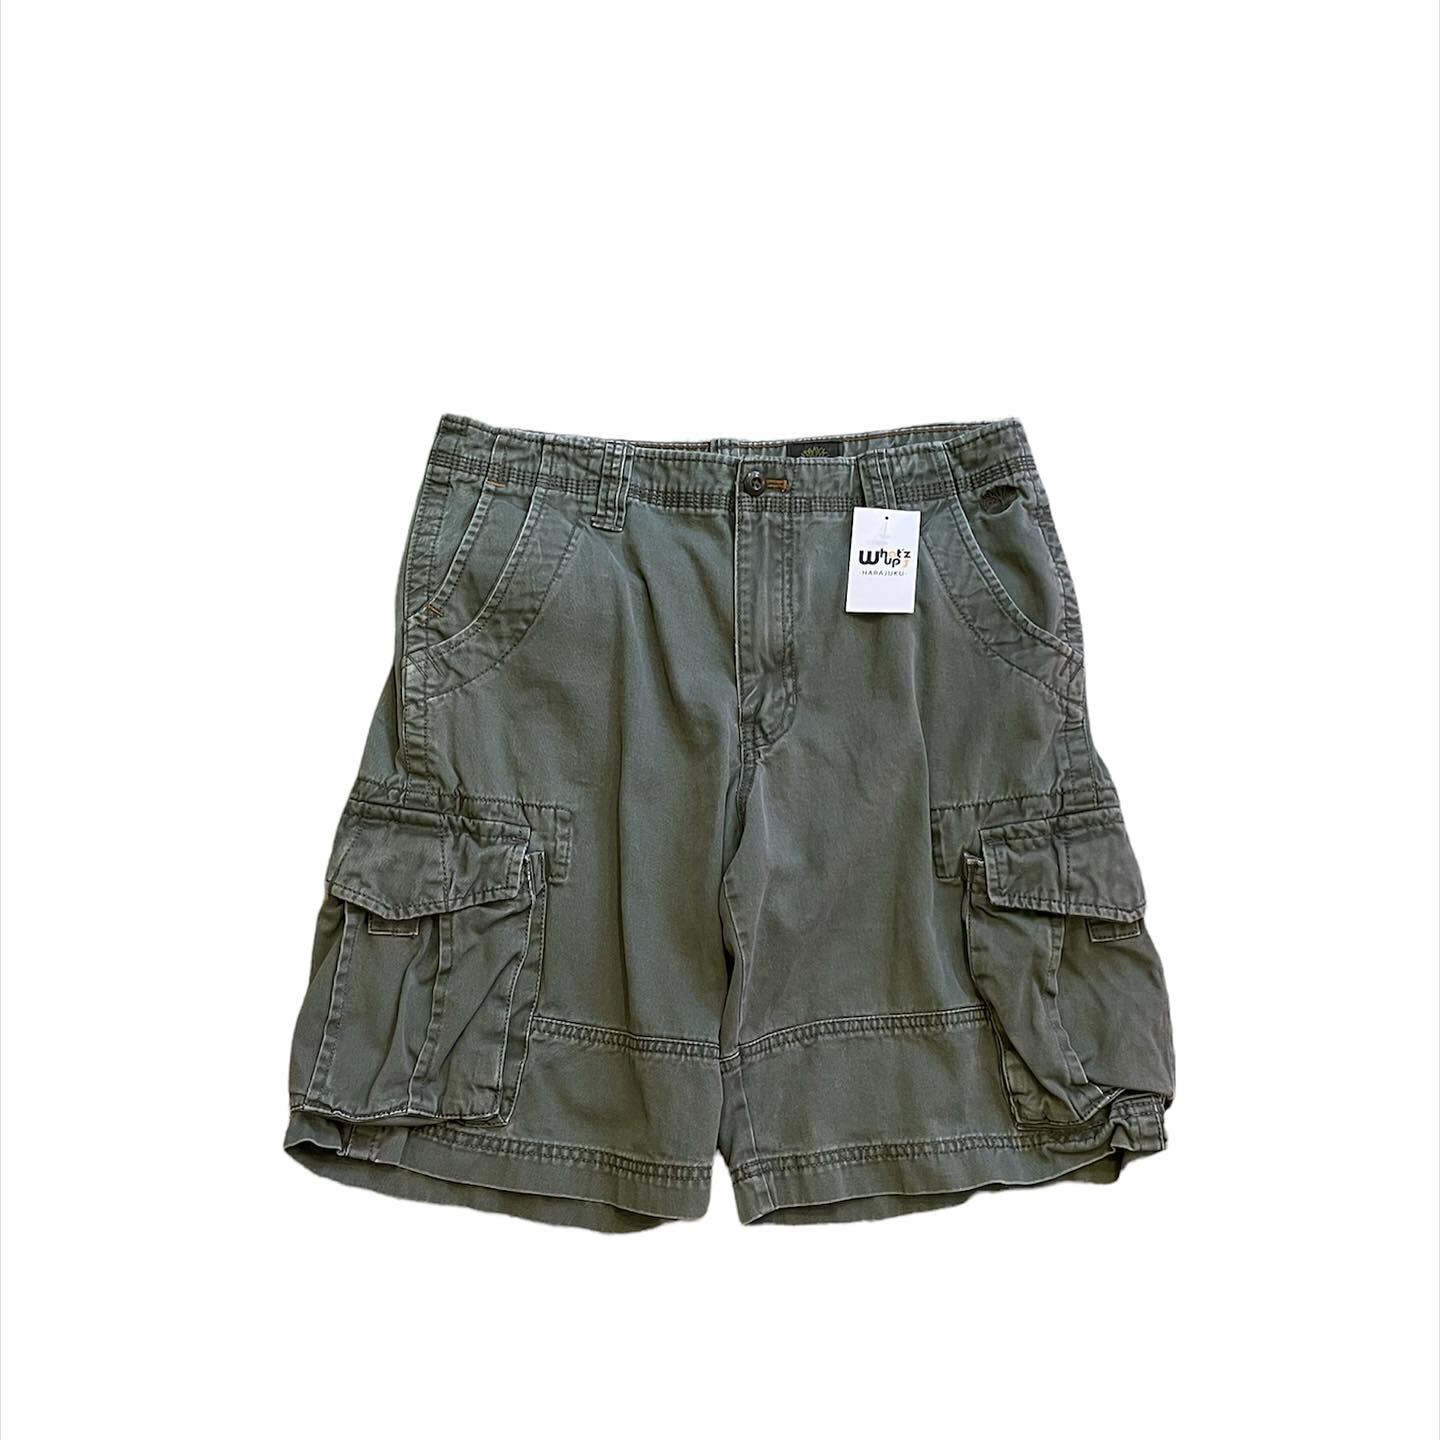 00s Timberland cargo short pant | What'z up